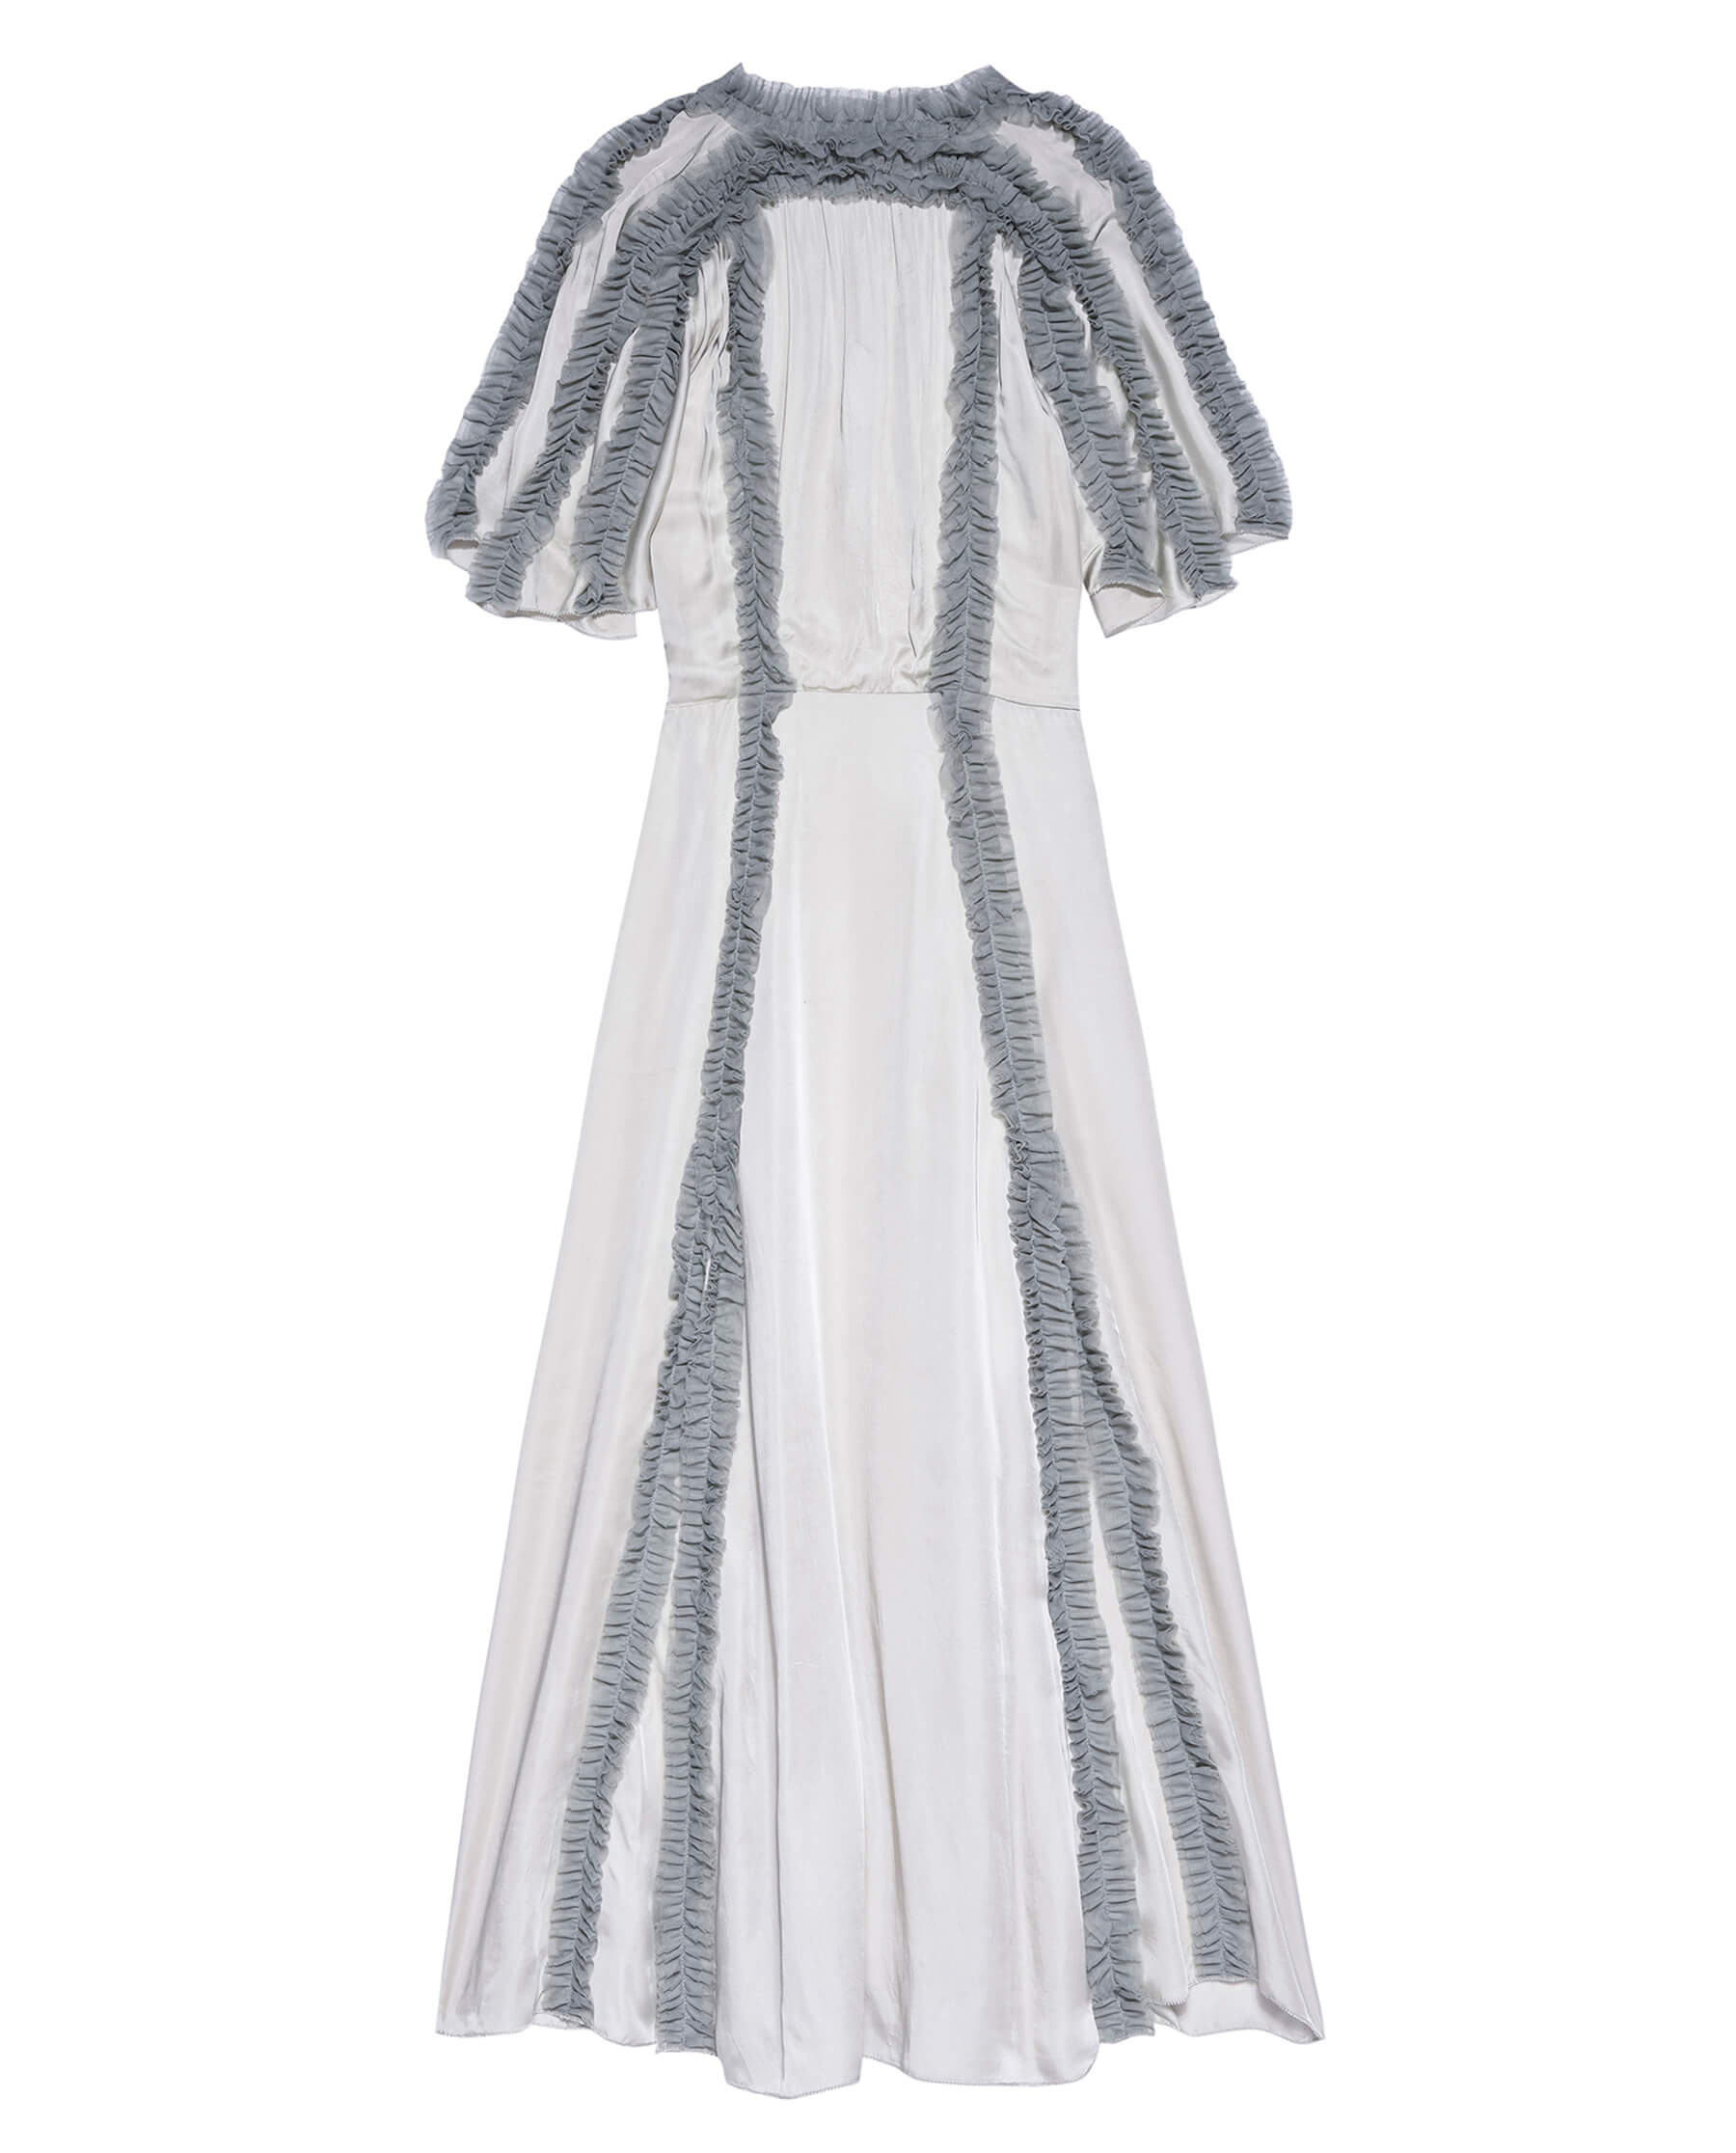 The Dancehall Dress. -- Silver with Icy Blue DRESSES THE GREAT. HOL 23 VISCOSE MESH SALE